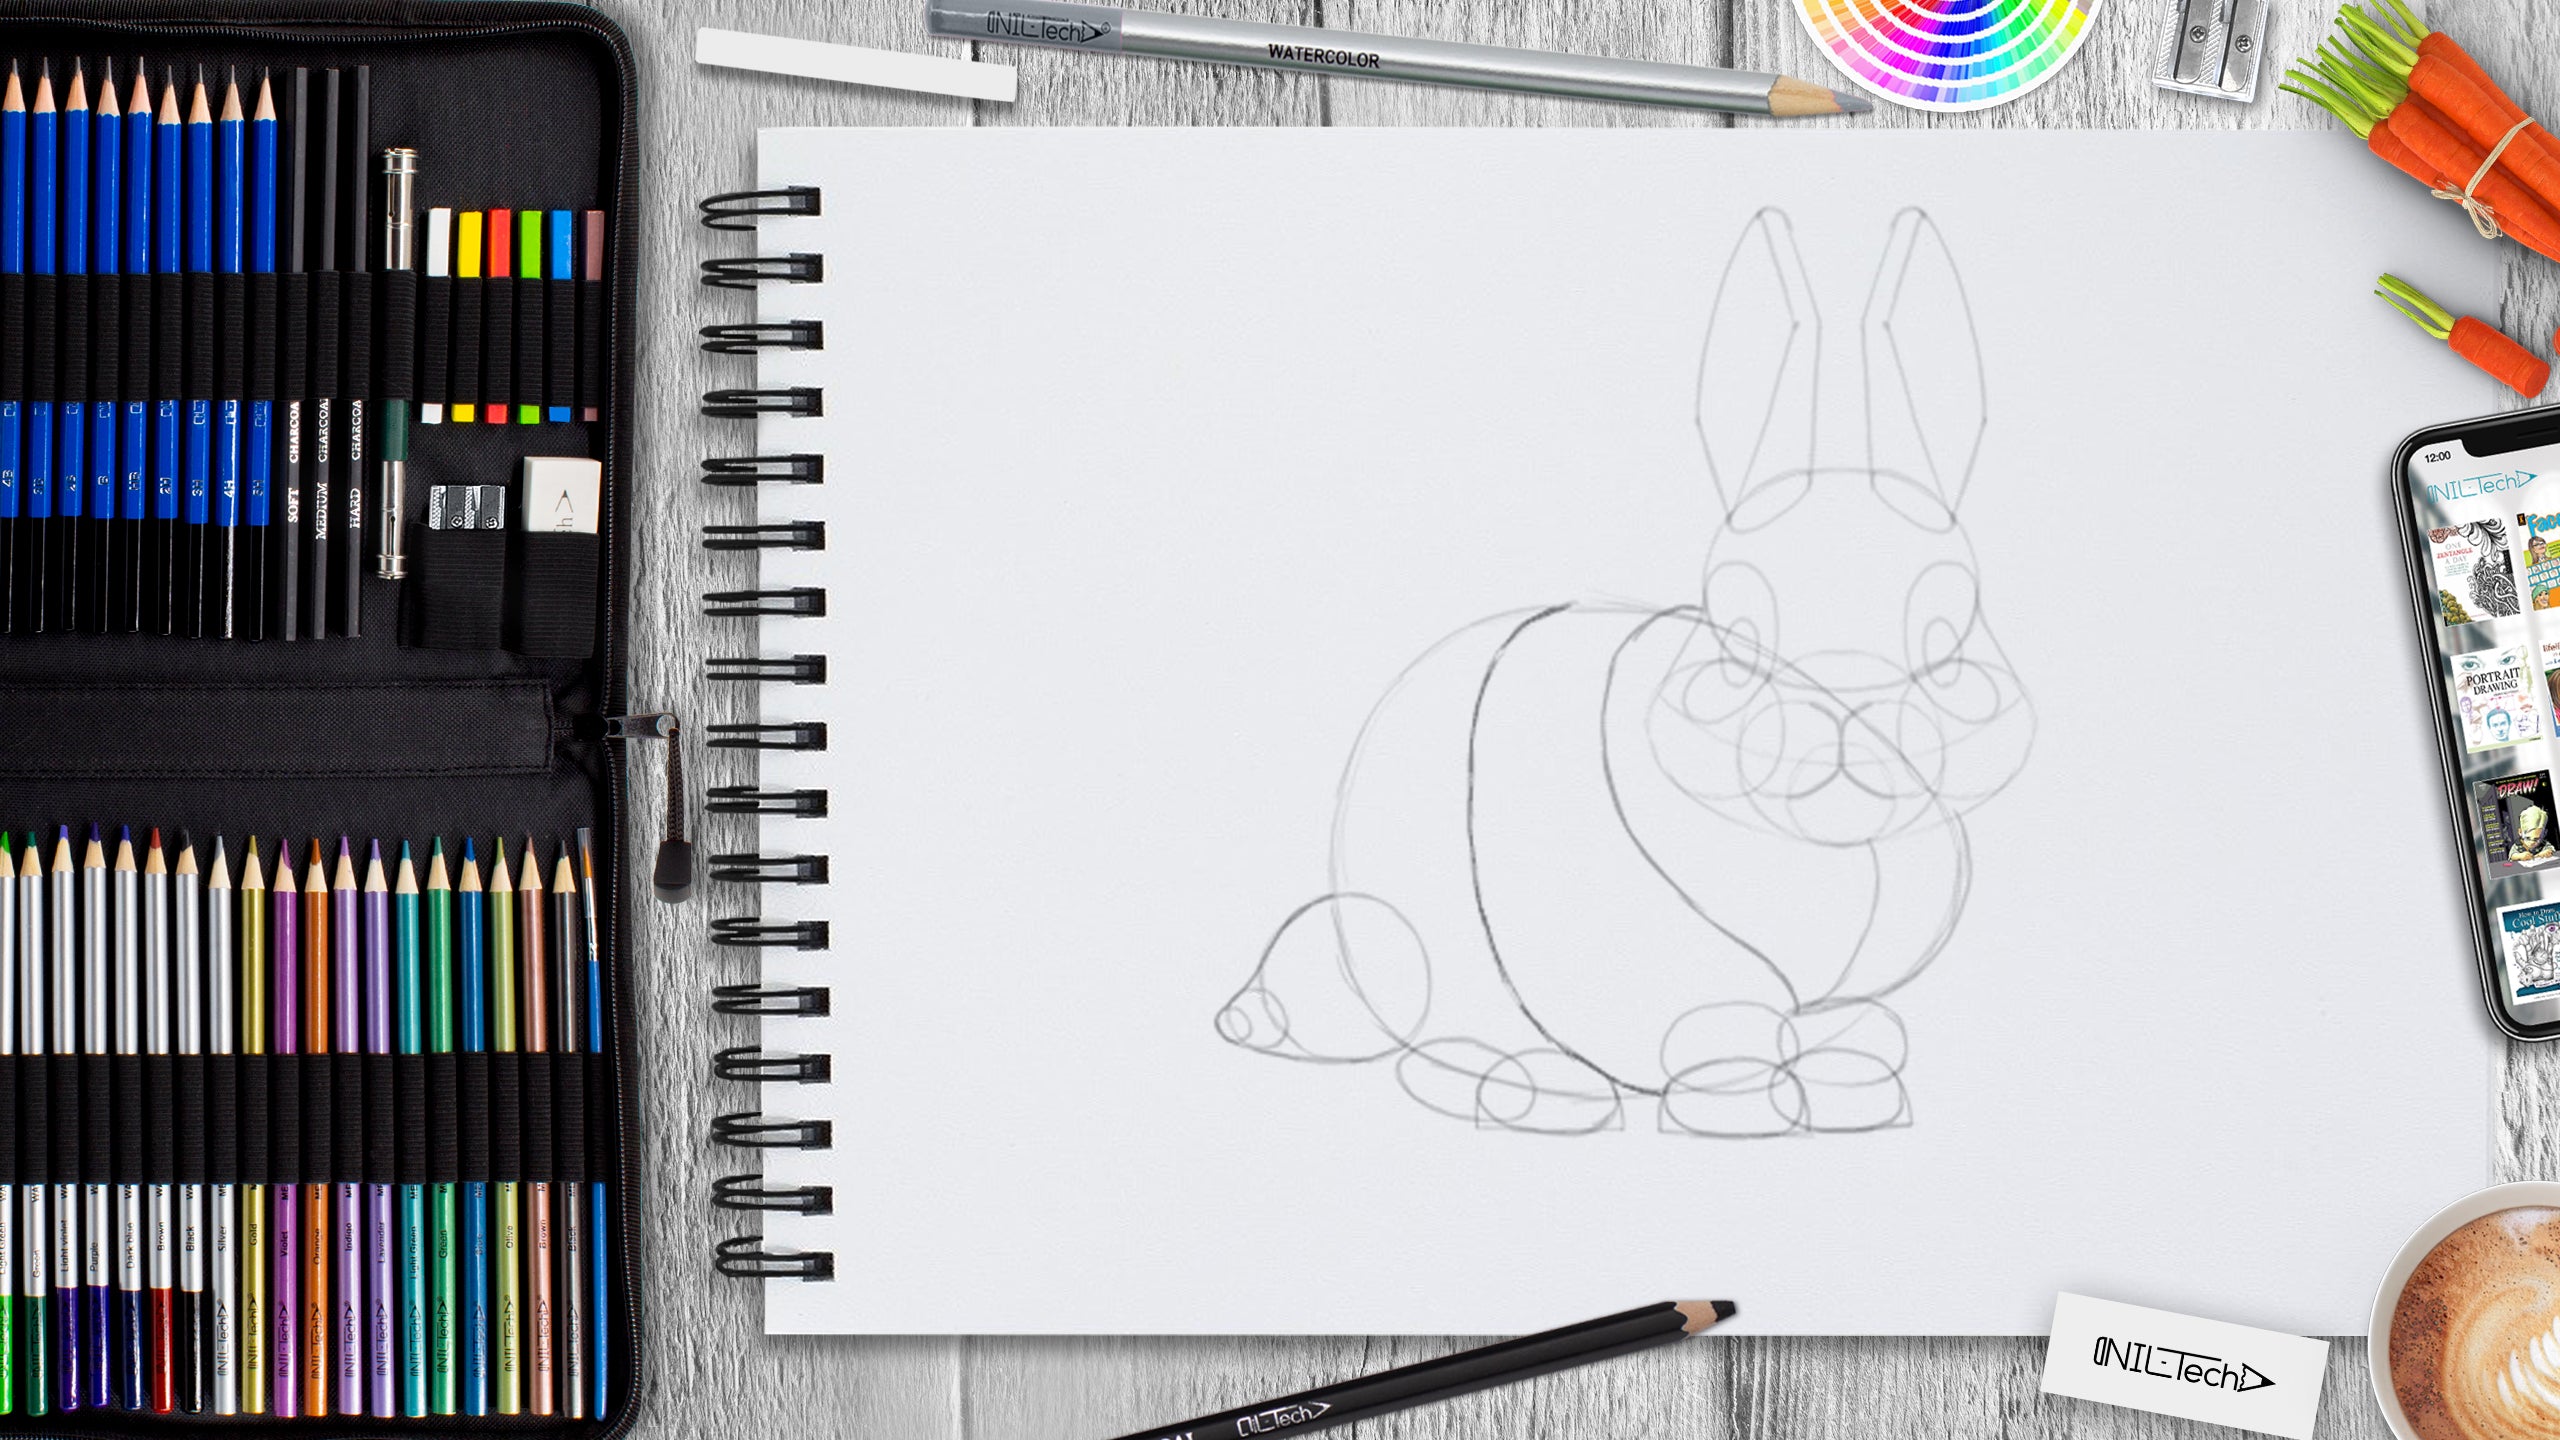 How To Draw A Rabbit - Art For Kids Hub - | Bunny drawing, Art for kids  hub, Rabbit drawing